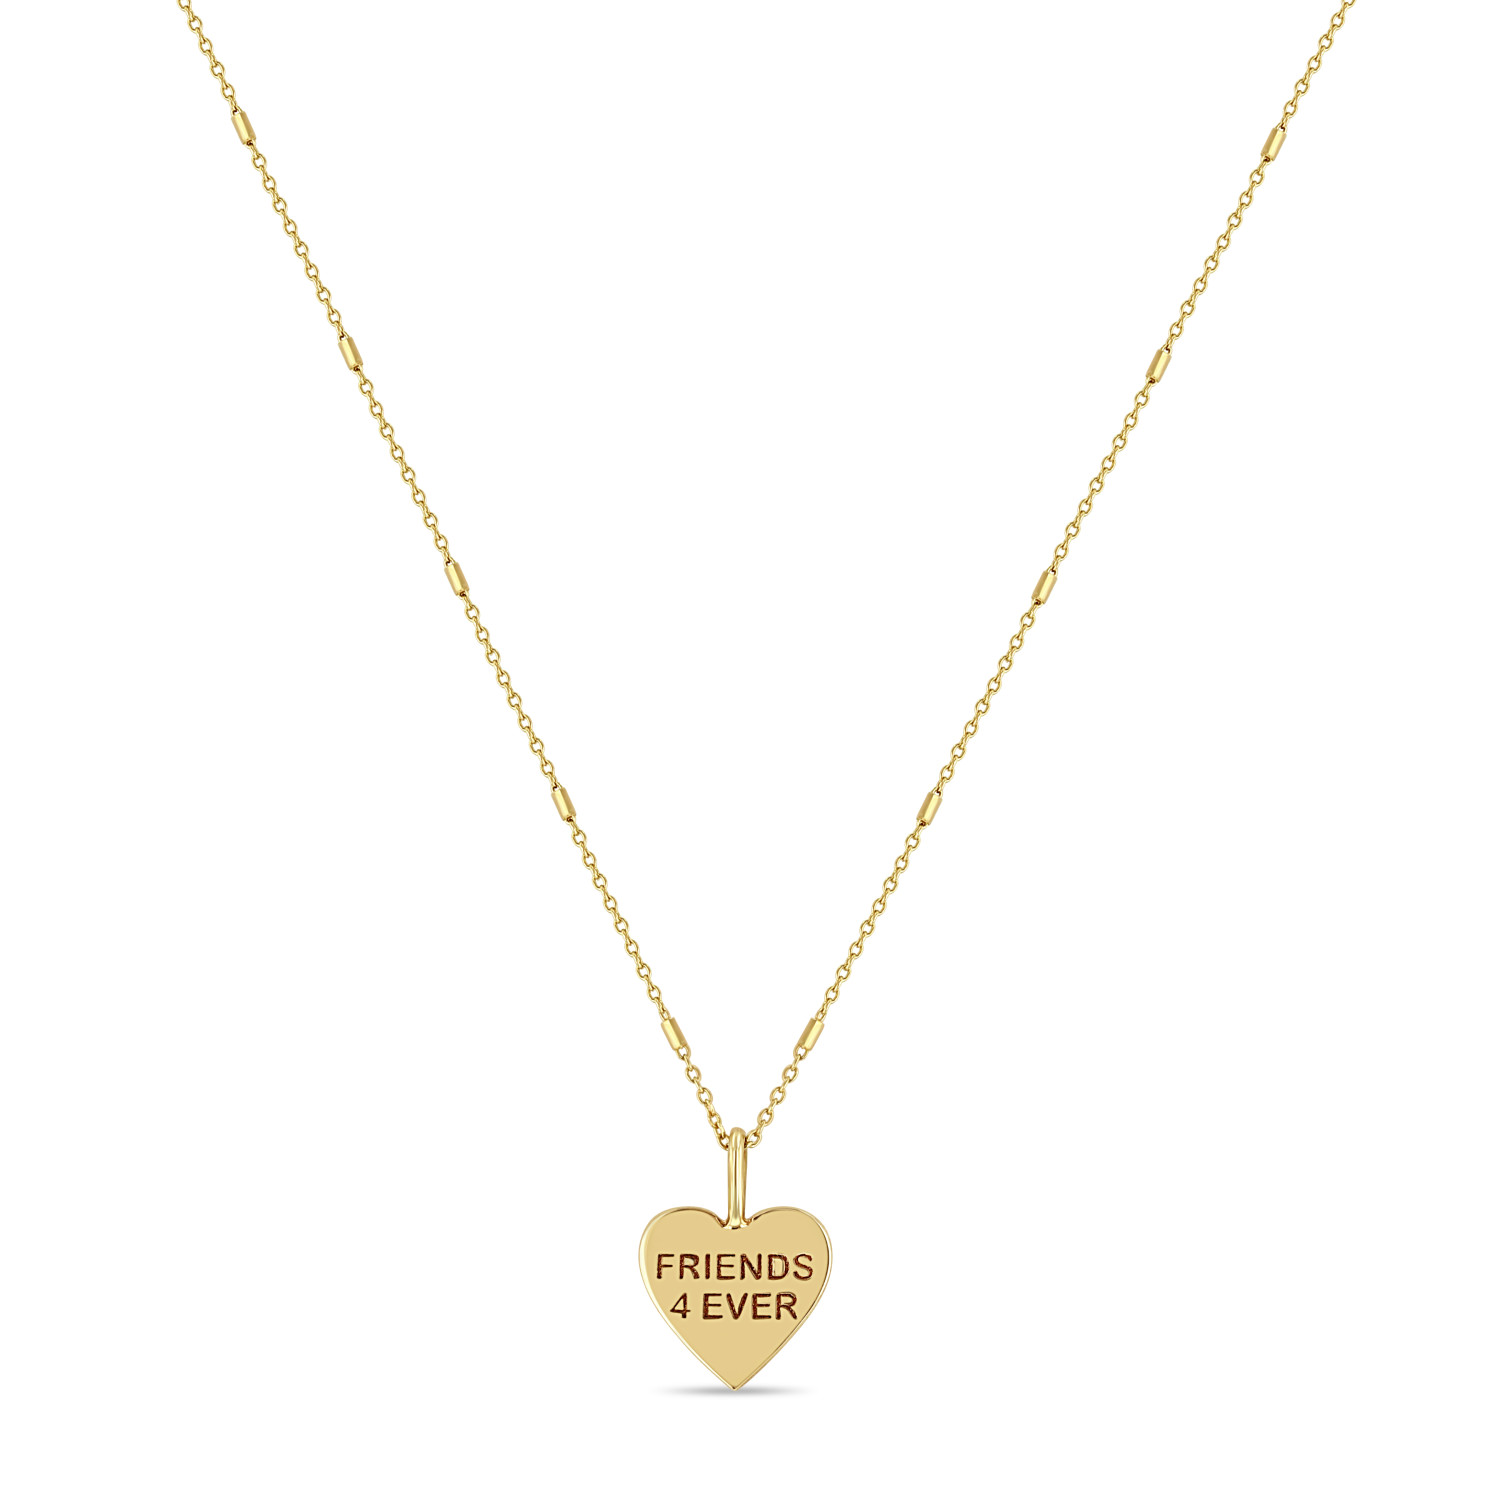 “FRIENDS 4 EVER” Heart Pendant Necklace in 14K Yellow Gold